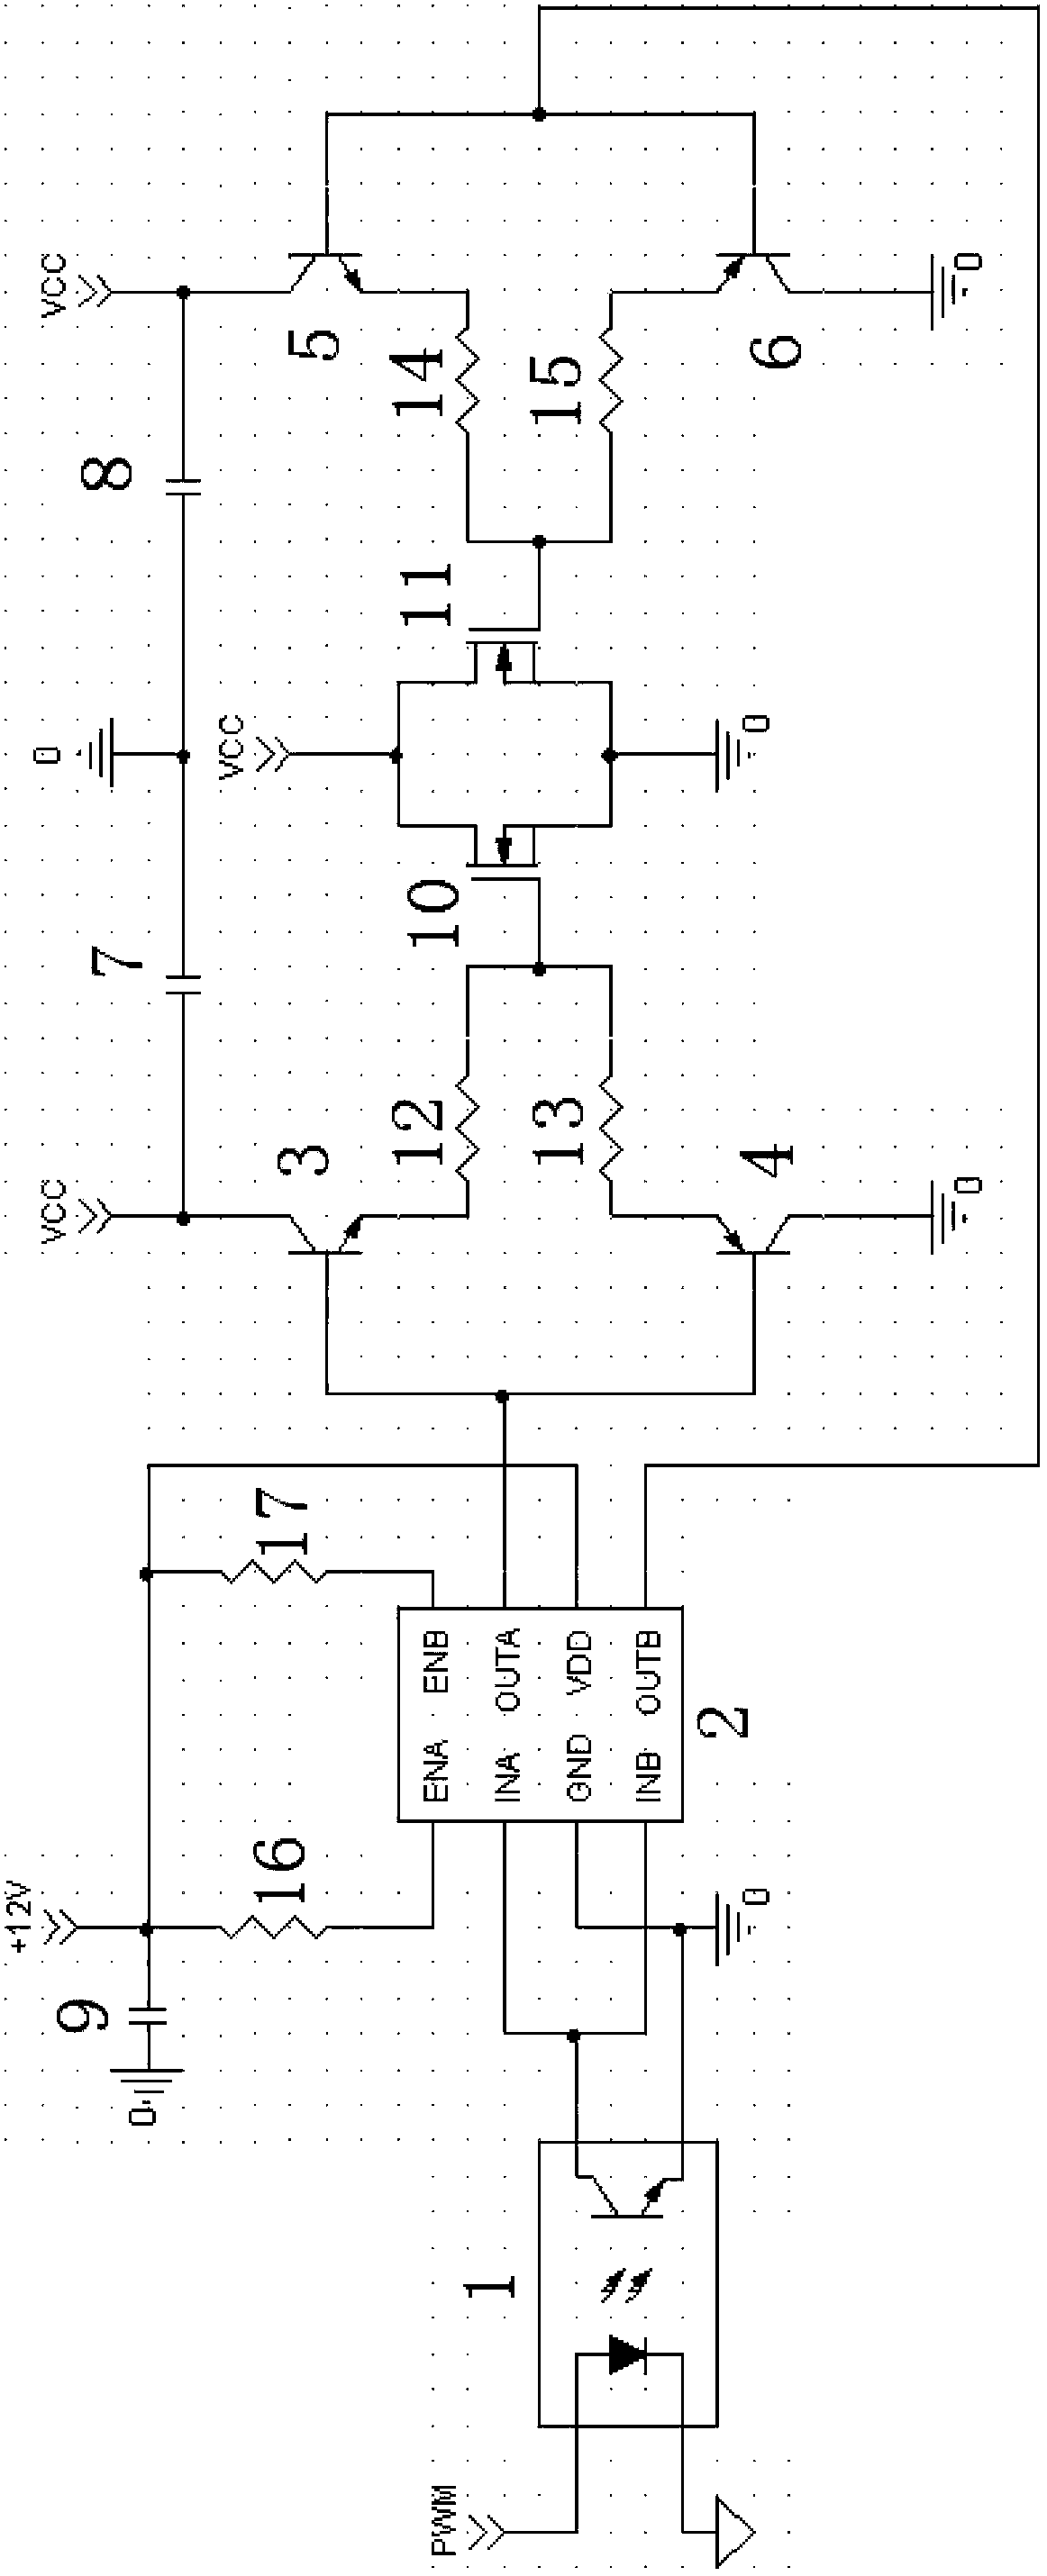 MOSFET-based power driving circuit